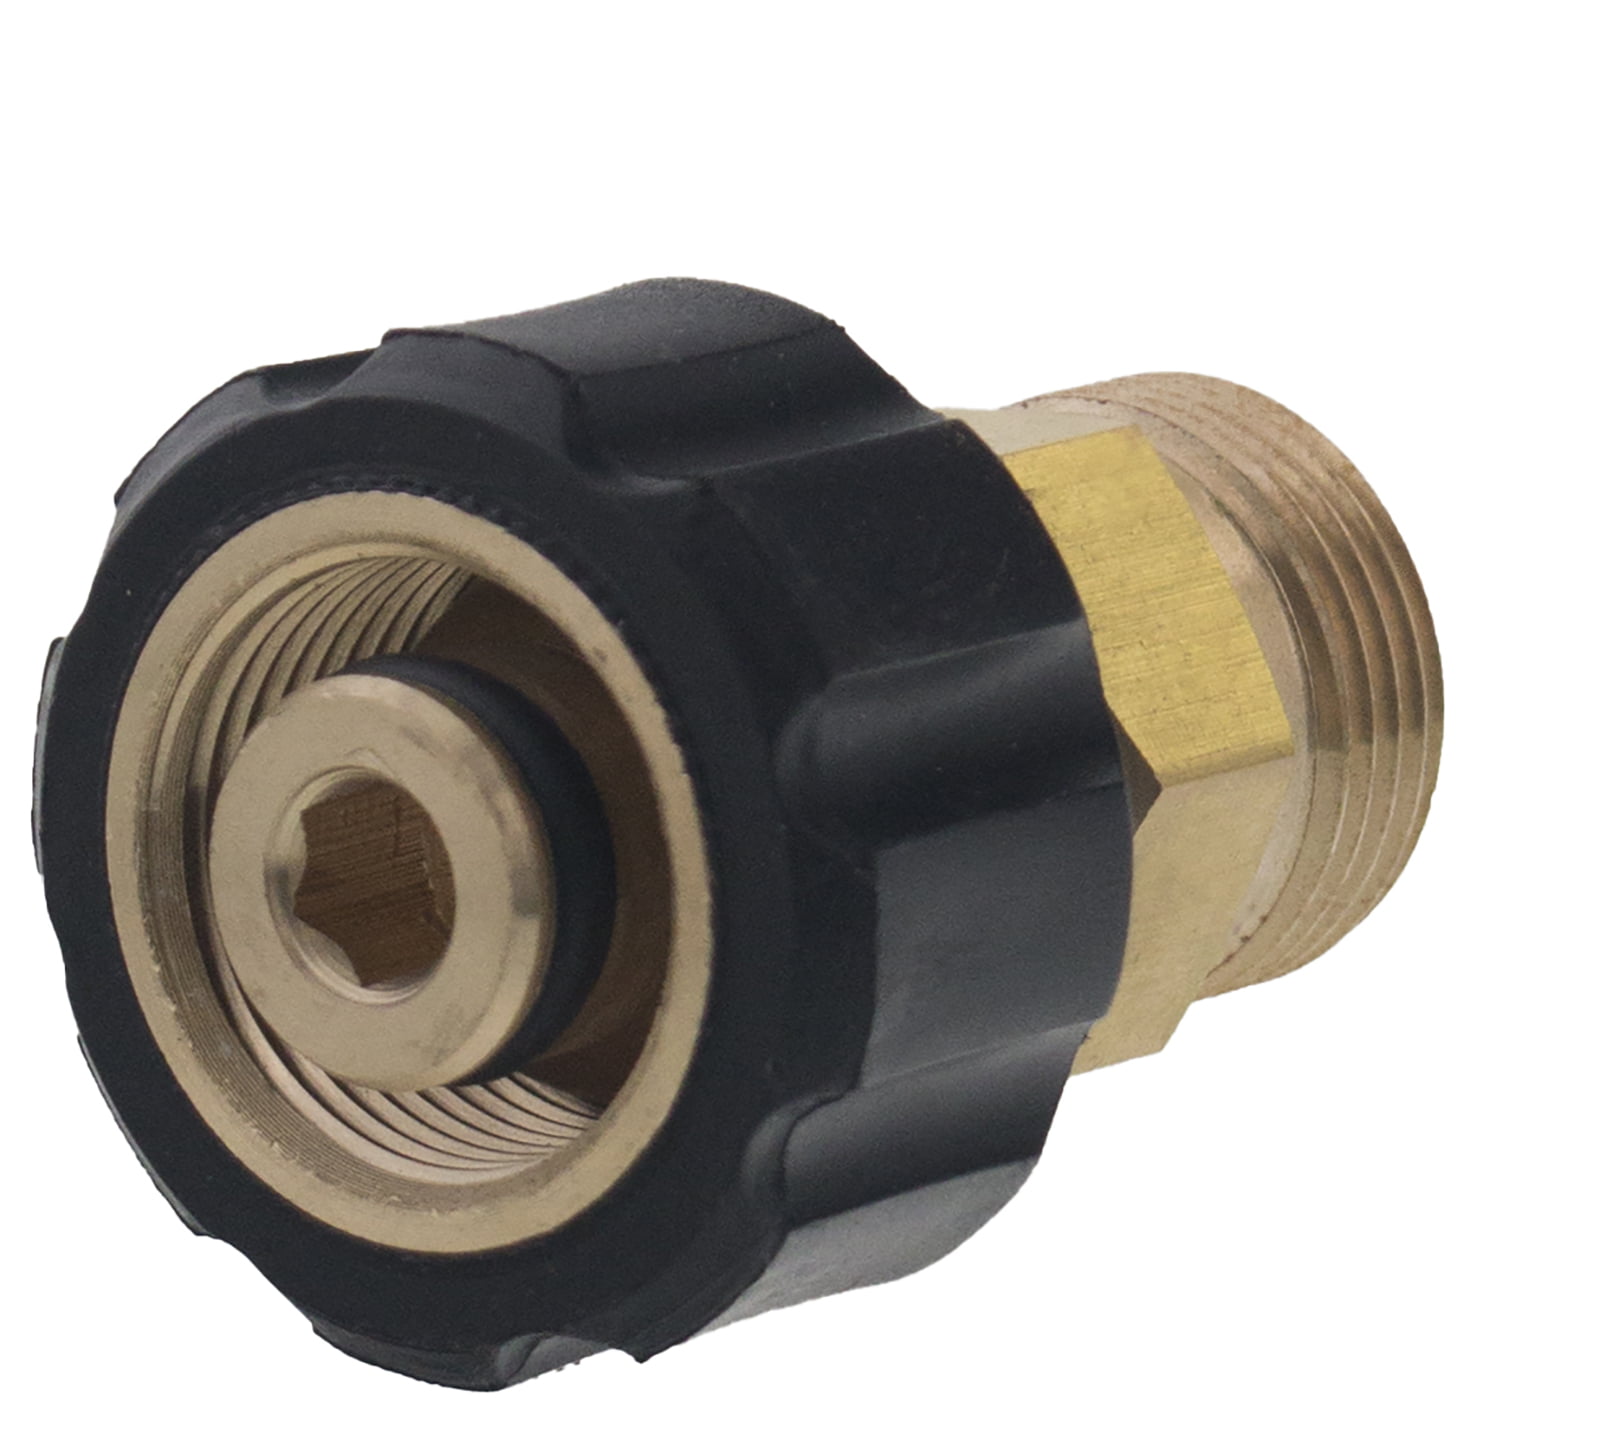 Brass Coupling Male 1/4 To Female M22x1.5 14mm Hole Pressure Washer Fitting 